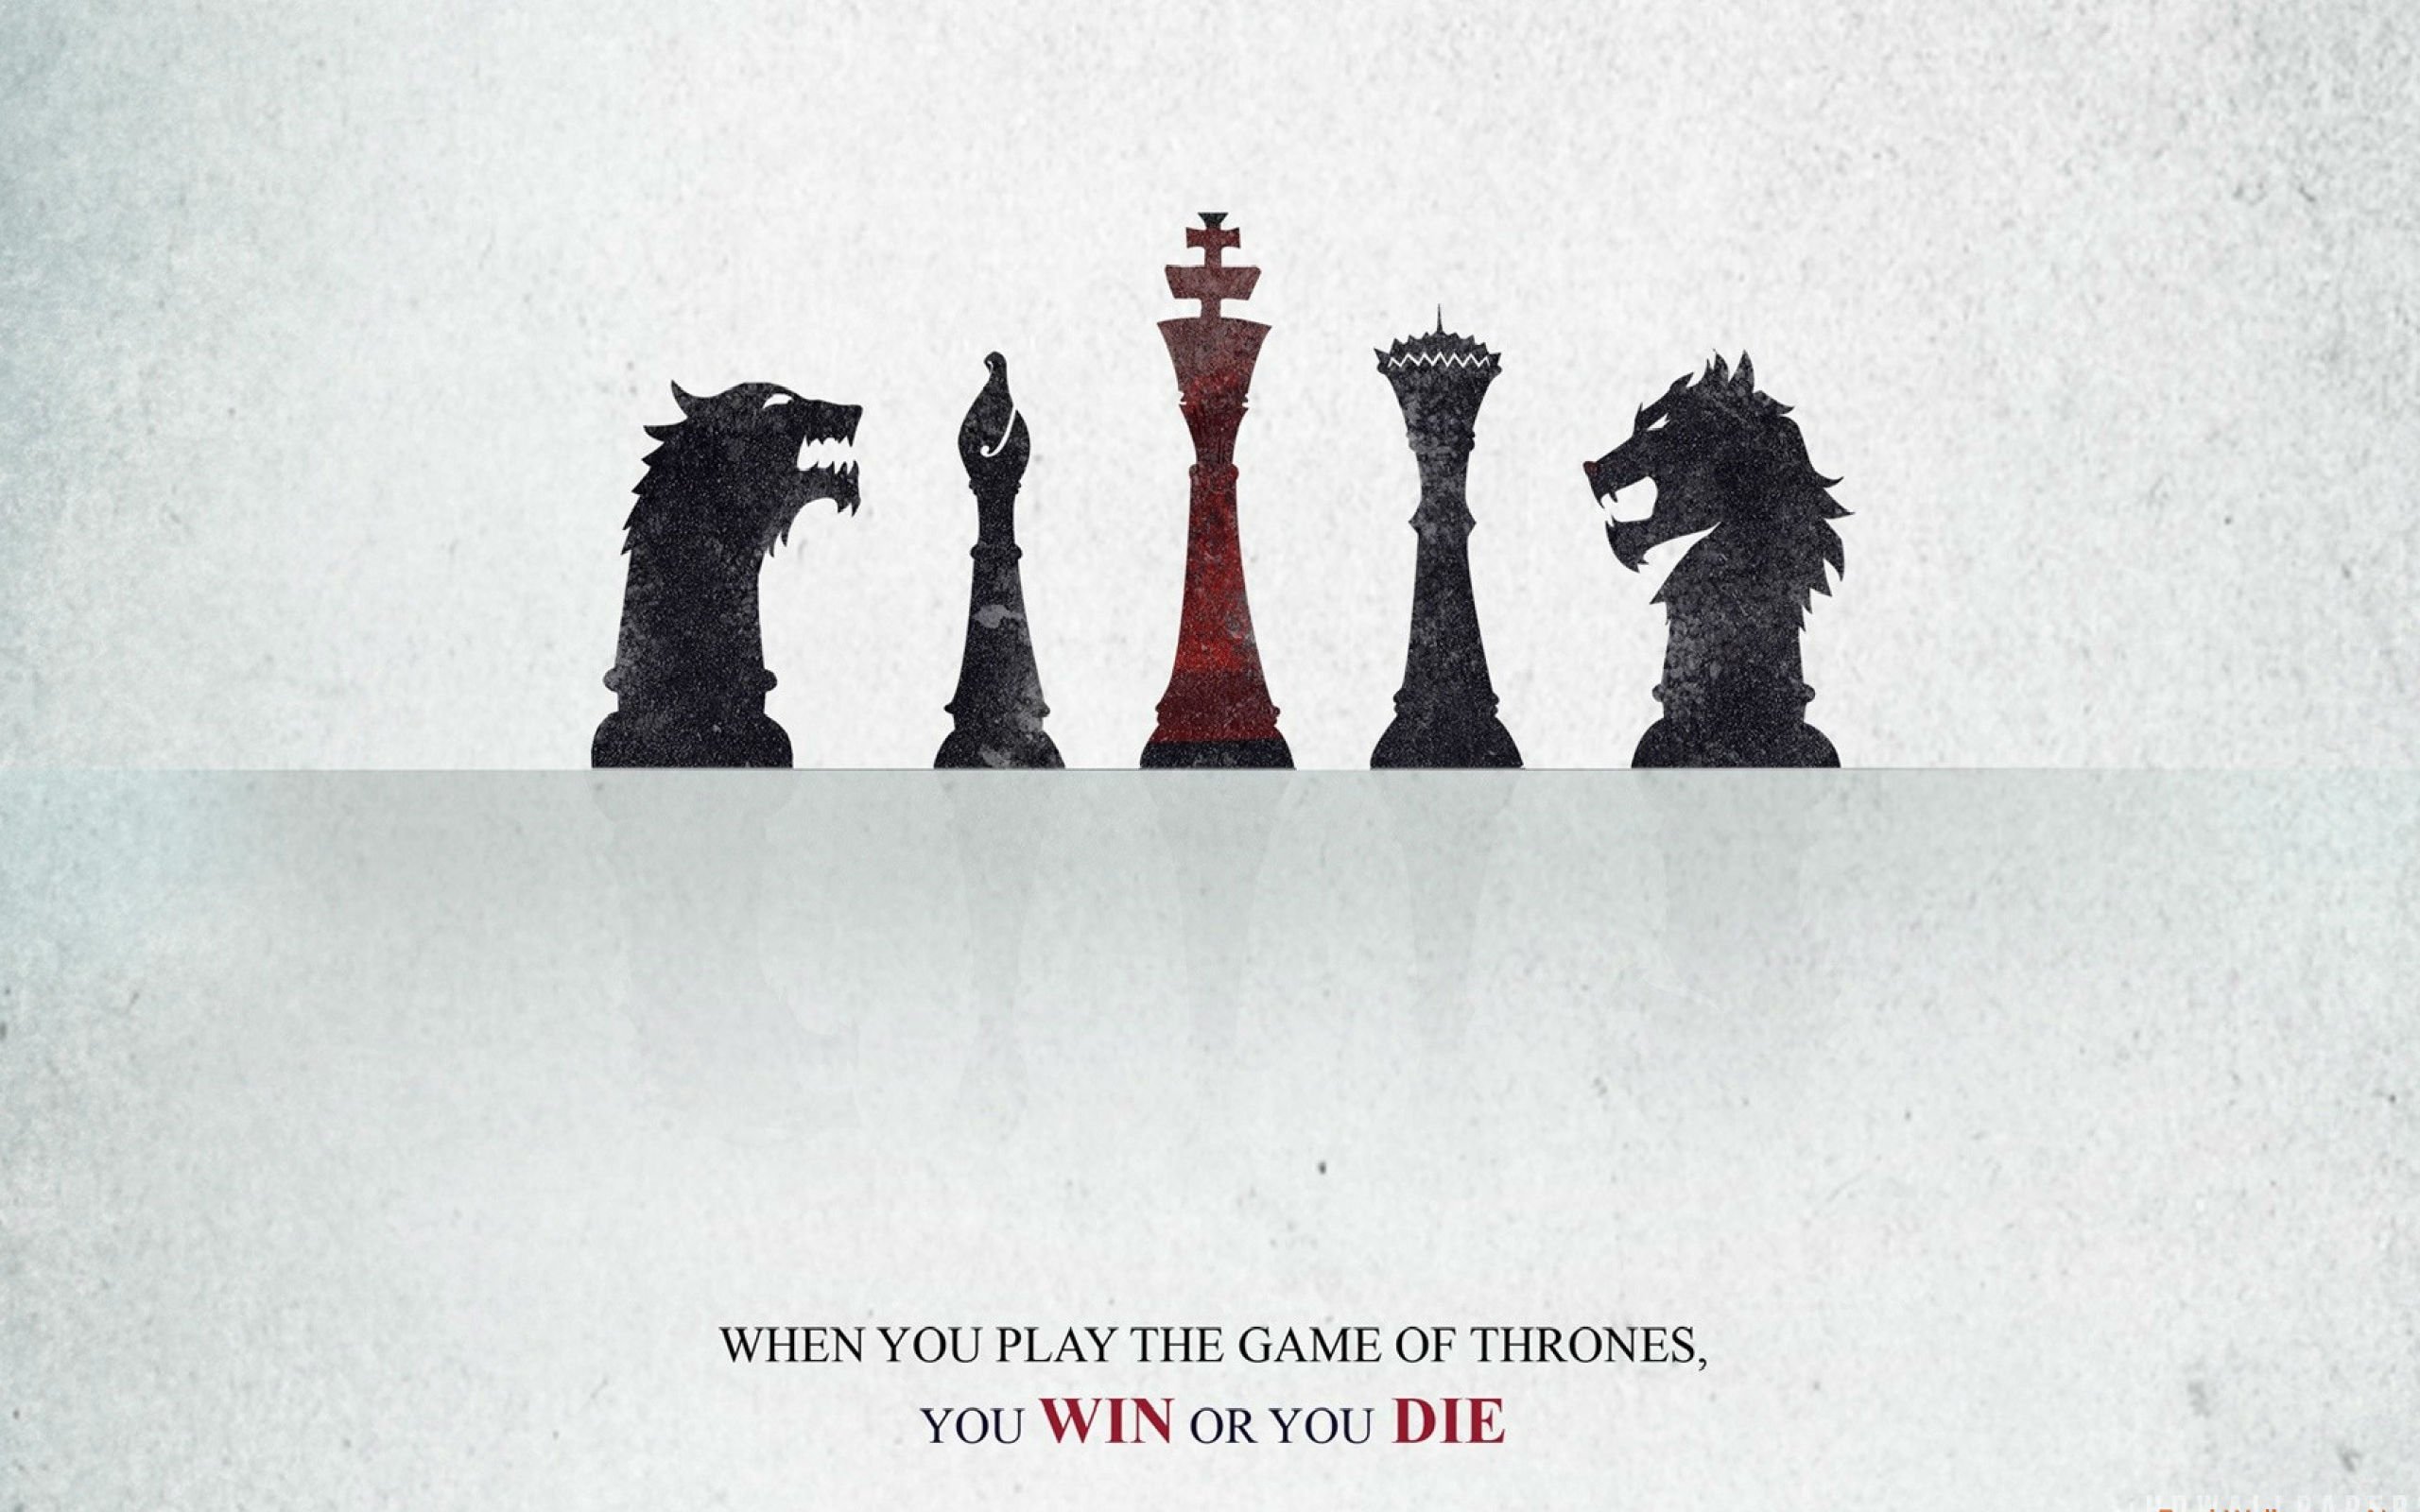 Wallpaper : 2560x1600 px, adventure, drama, fantasy, game, HBO, of, poster, series, thrones 2560x1600